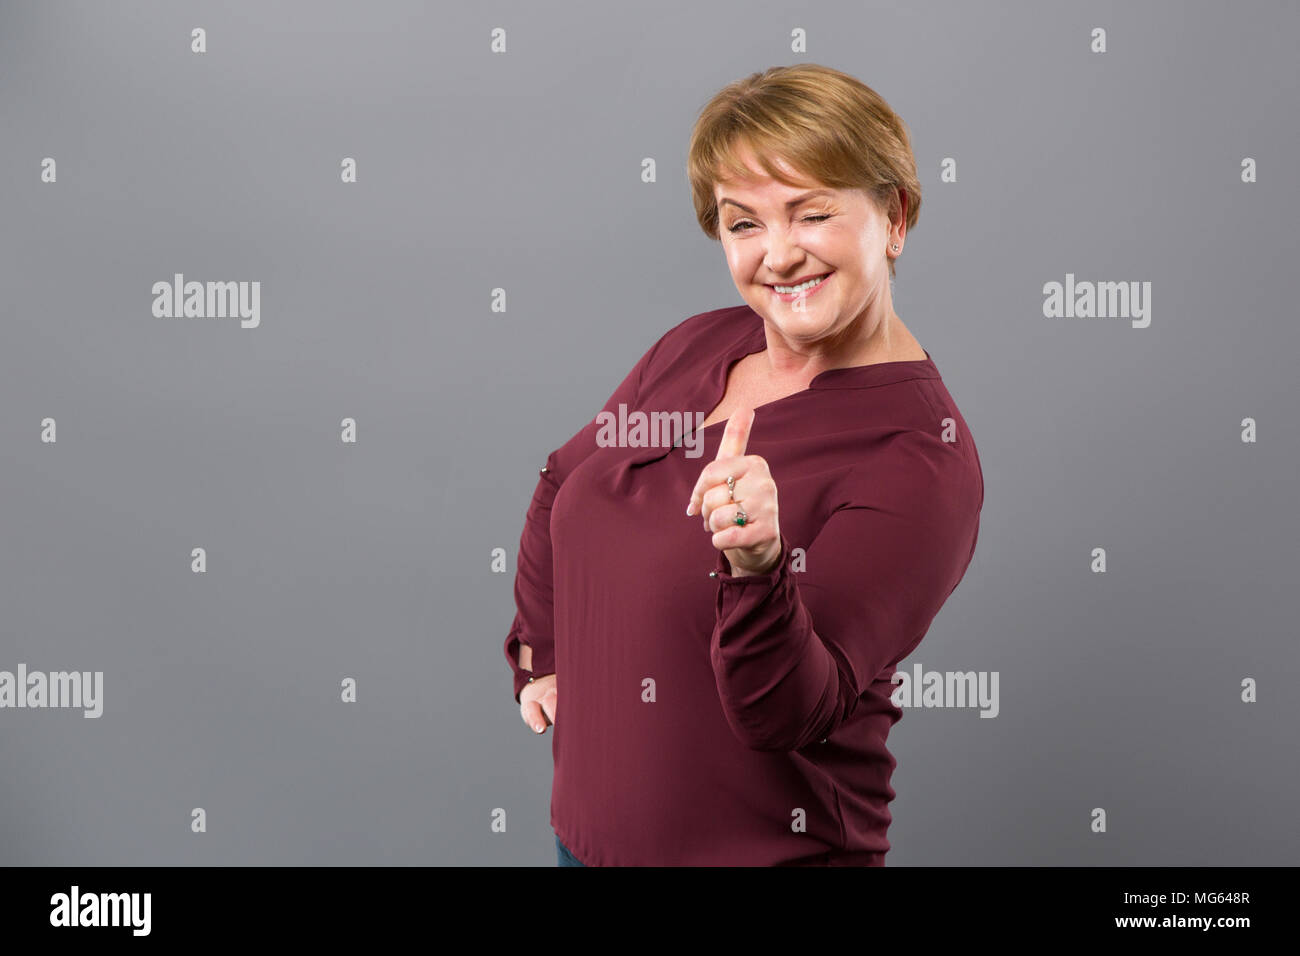 Cheerful adult woman being in a great mood Stock Photo